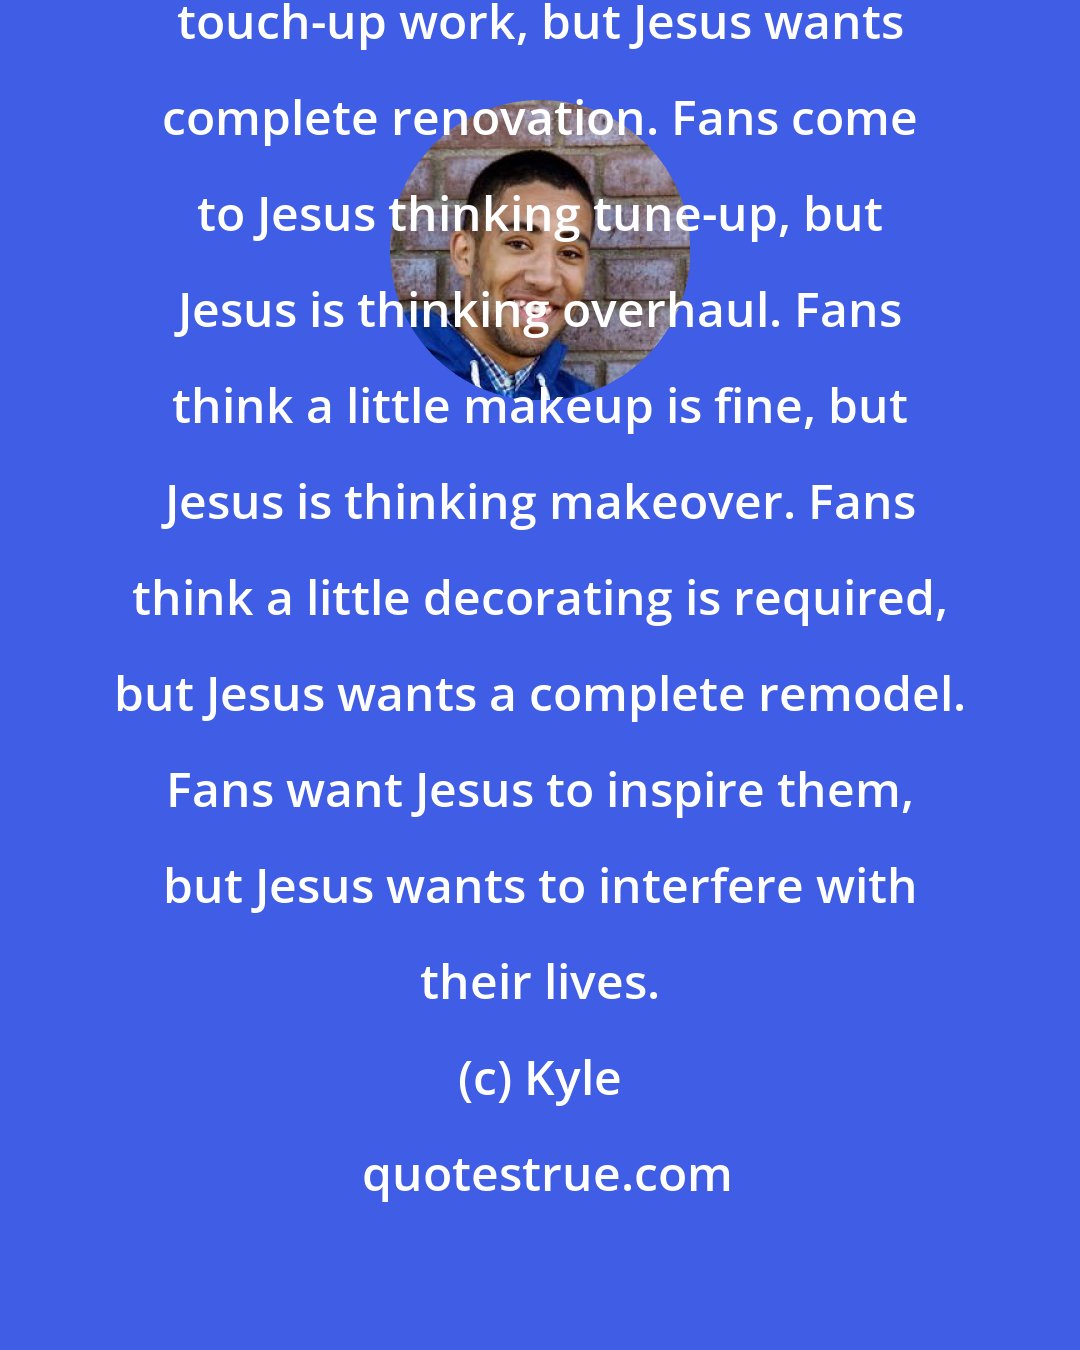 Kyle: Fans don't mind him doing a little touch-up work, but Jesus wants complete renovation. Fans come to Jesus thinking tune-up, but Jesus is thinking overhaul. Fans think a little makeup is fine, but Jesus is thinking makeover. Fans think a little decorating is required, but Jesus wants a complete remodel. Fans want Jesus to inspire them, but Jesus wants to interfere with their lives.